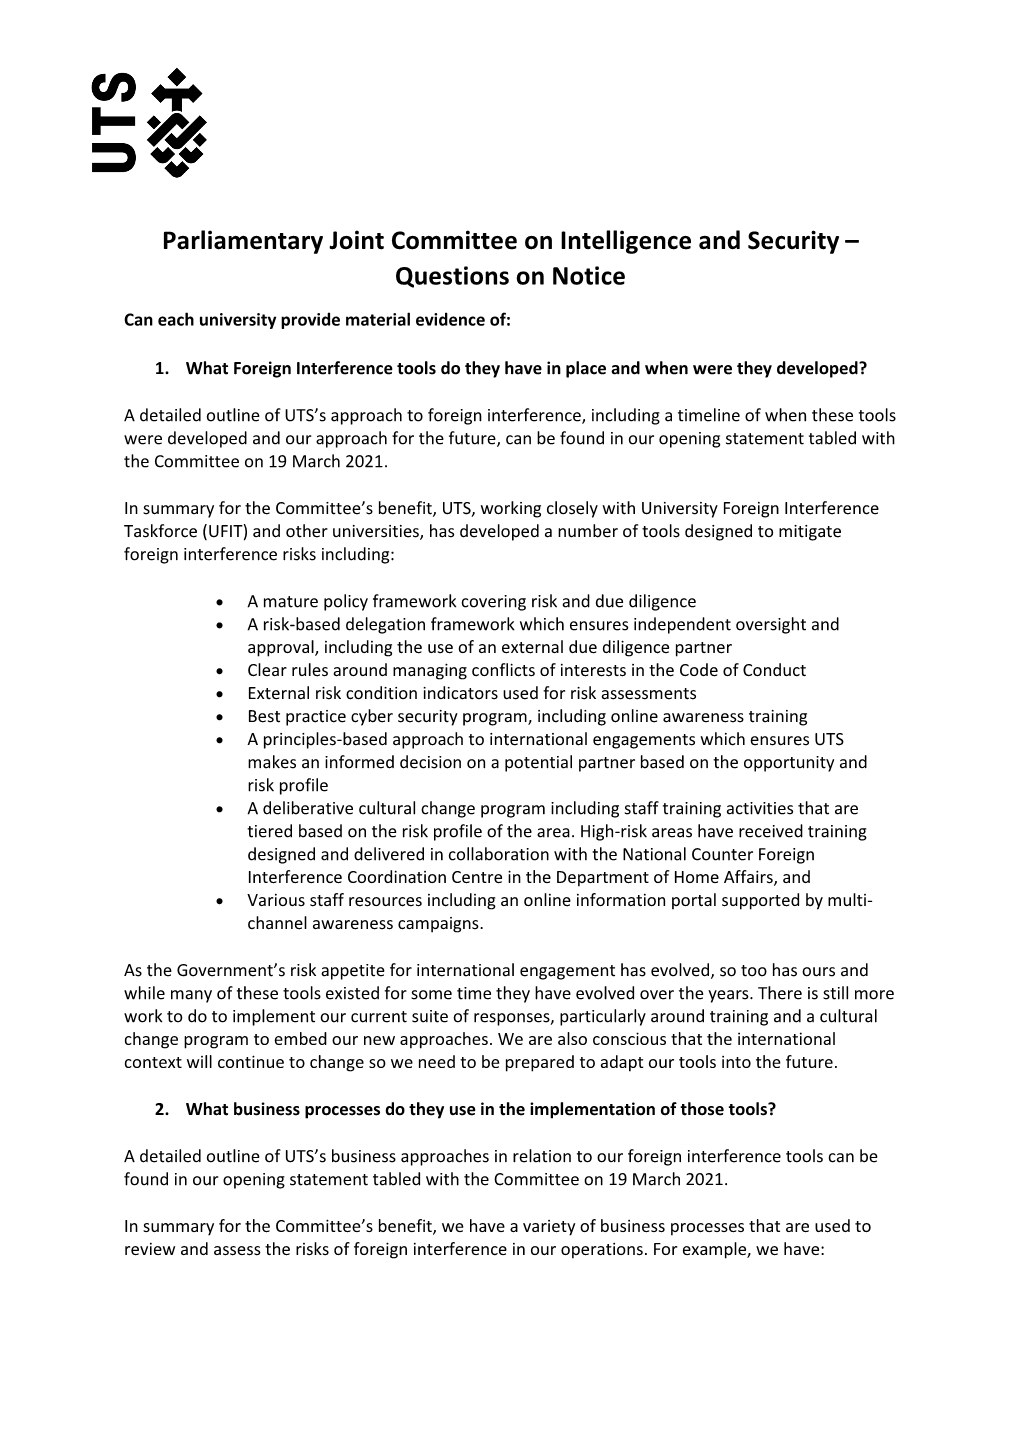 Parliamentary Joint Committee on Intelligence and Security – Questions on Notice